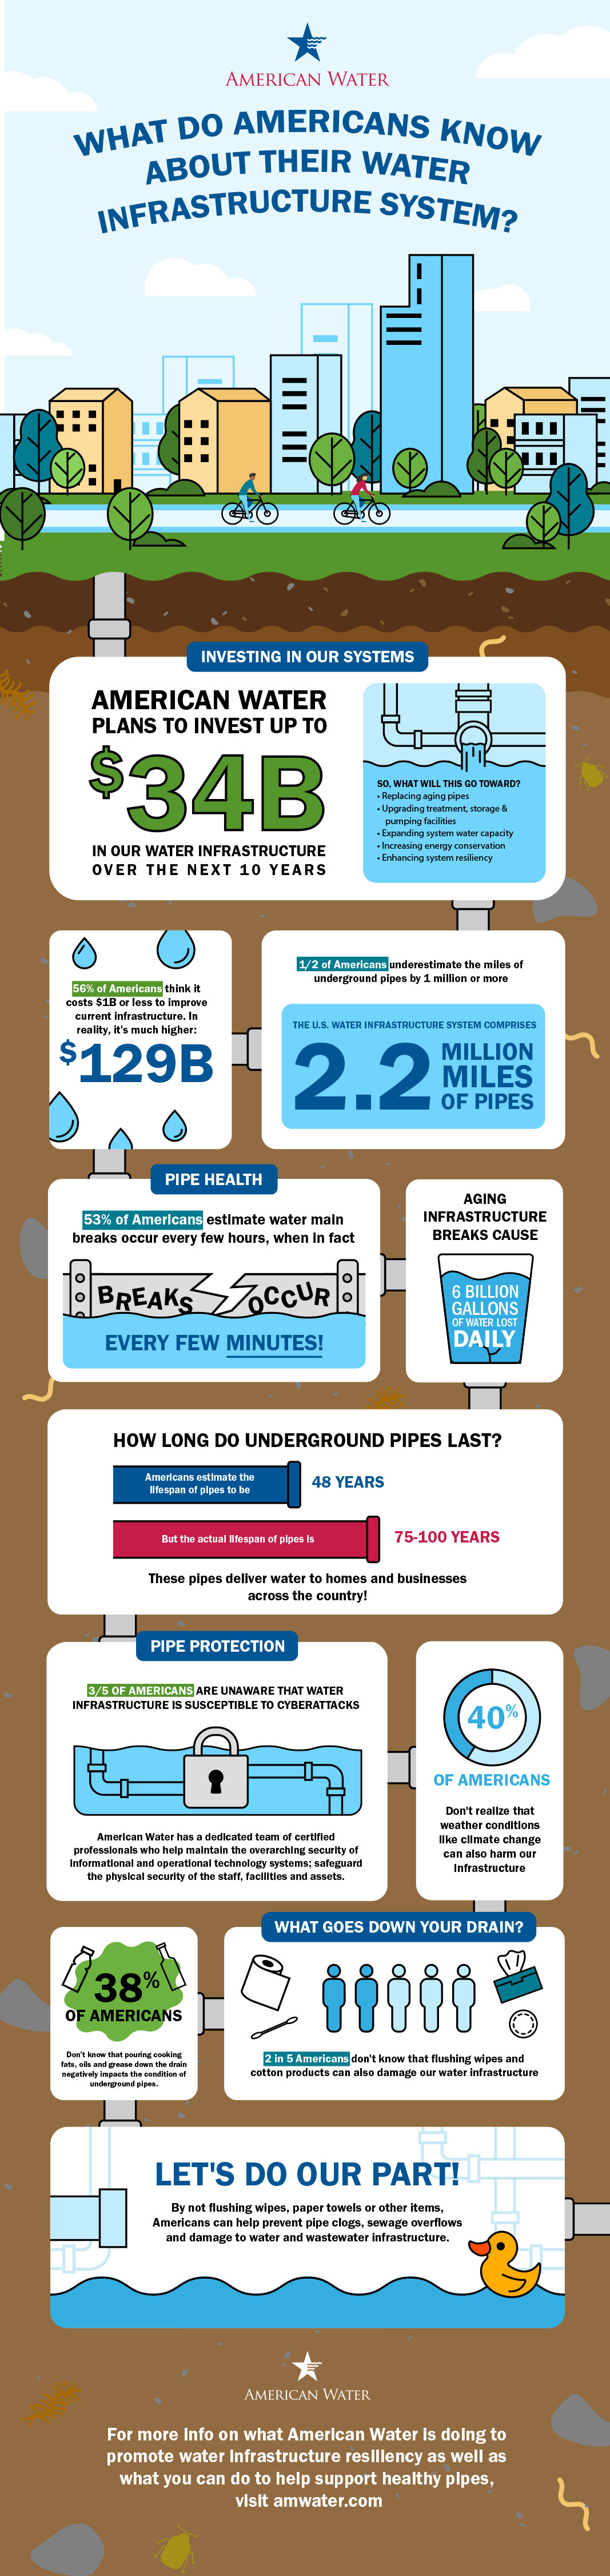 American Water PESO Campaign Infographic